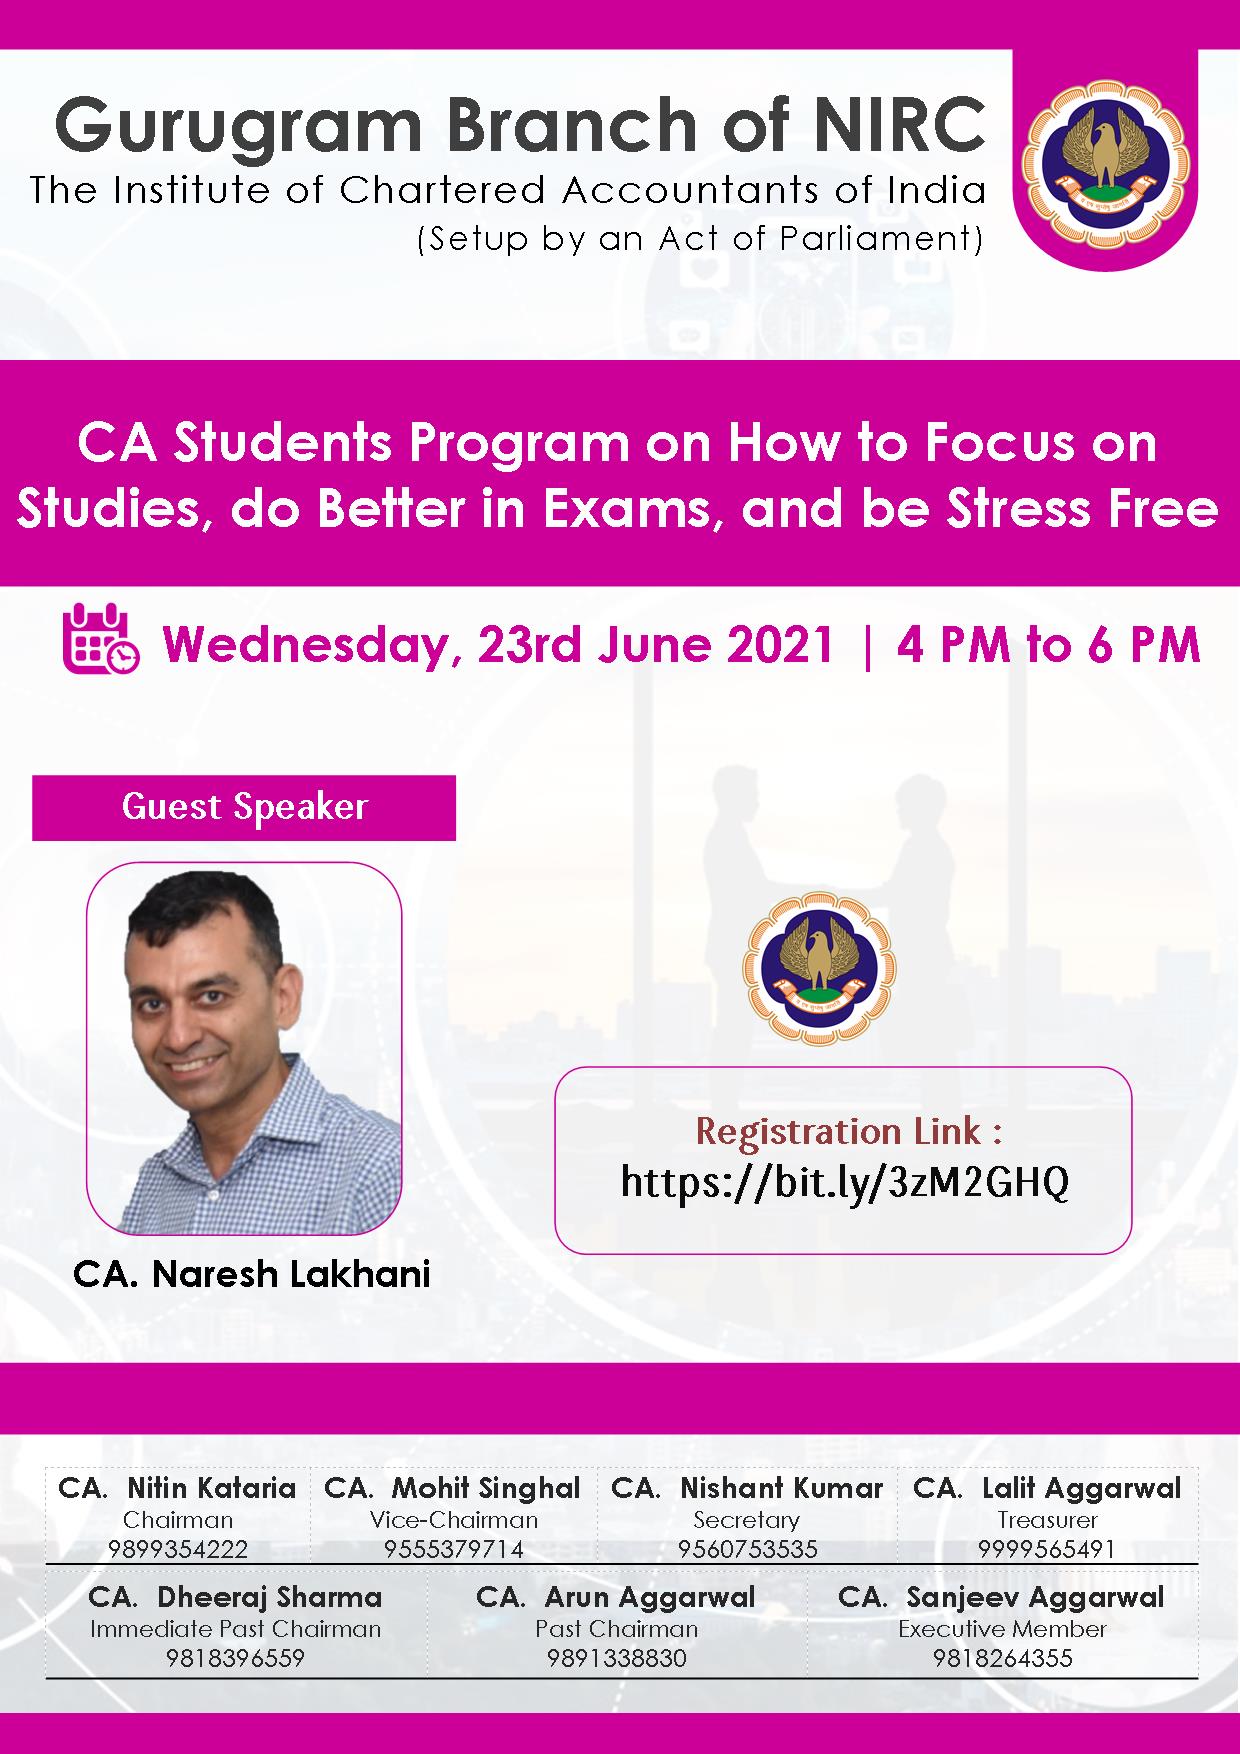 VCM on How to Focus on Studies, do Better in Exams, and be Stress Free for CA Students